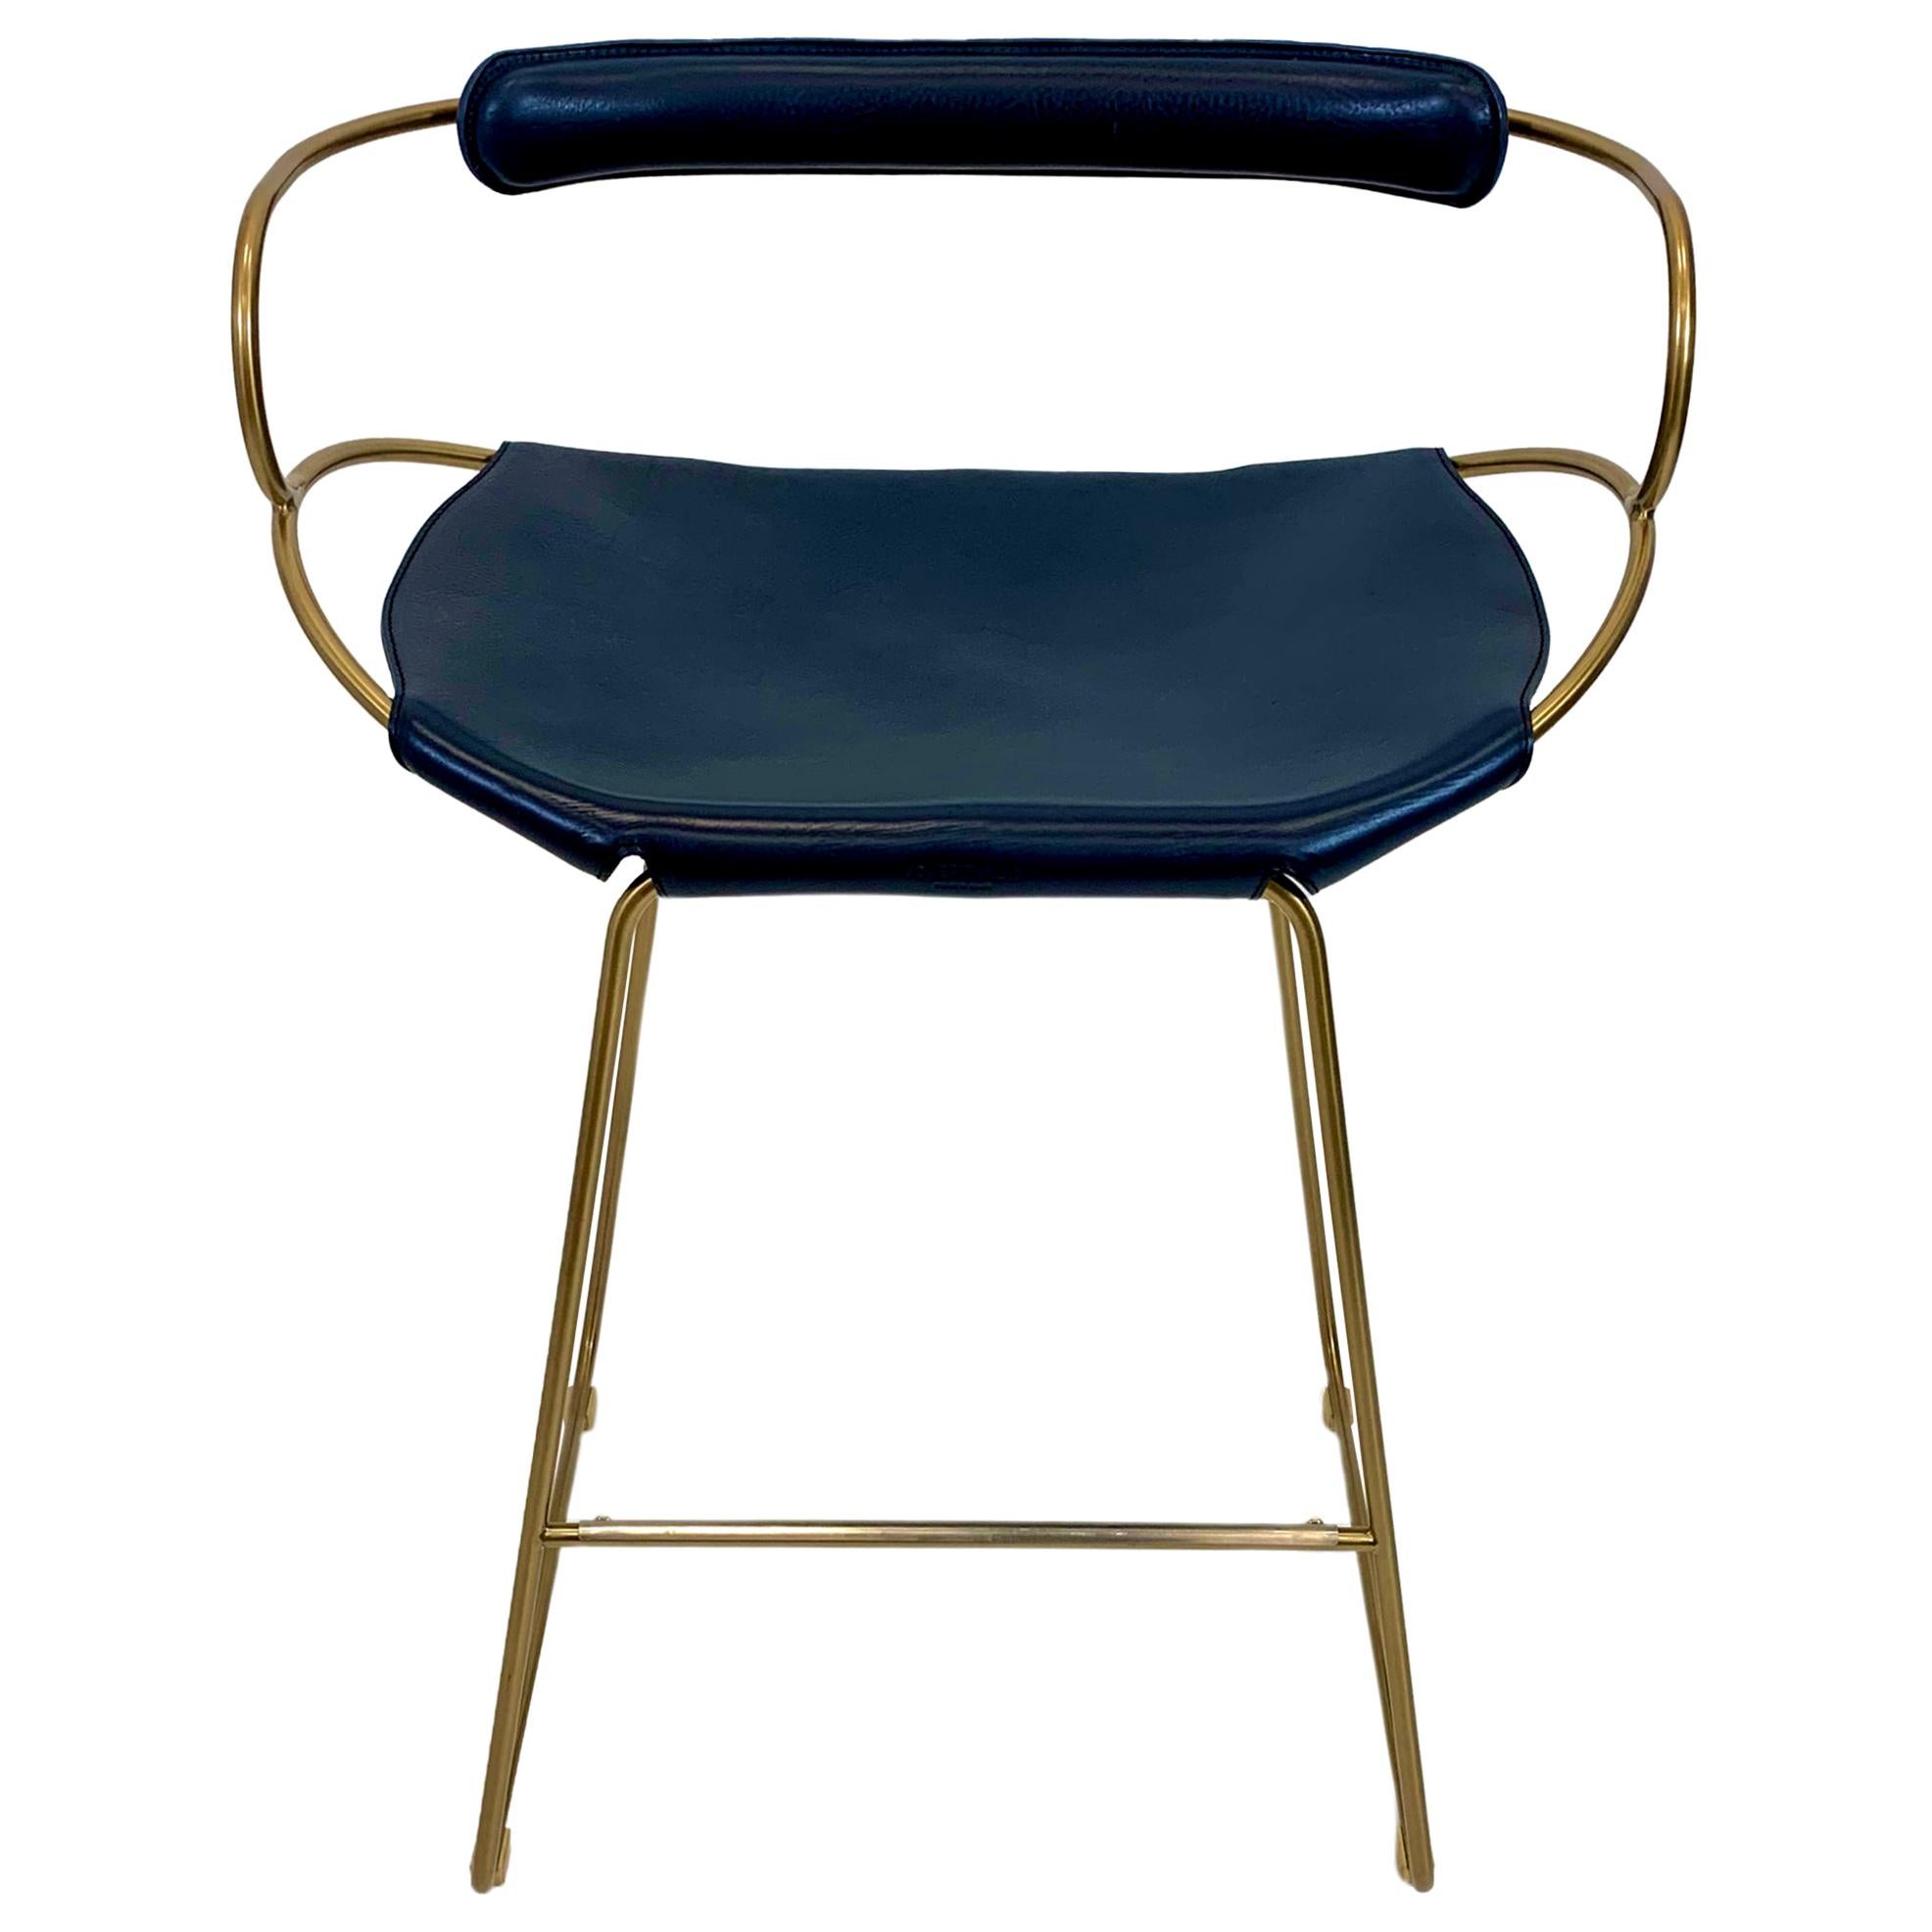 The Hug contemporary counter stool with backrest is designed and conceived with a light aesthetic, the slight oscillation of the steel rod of 12 mm is complemented by the flexibility of the double 3.5 mm thick leather. When sitting in this furniture